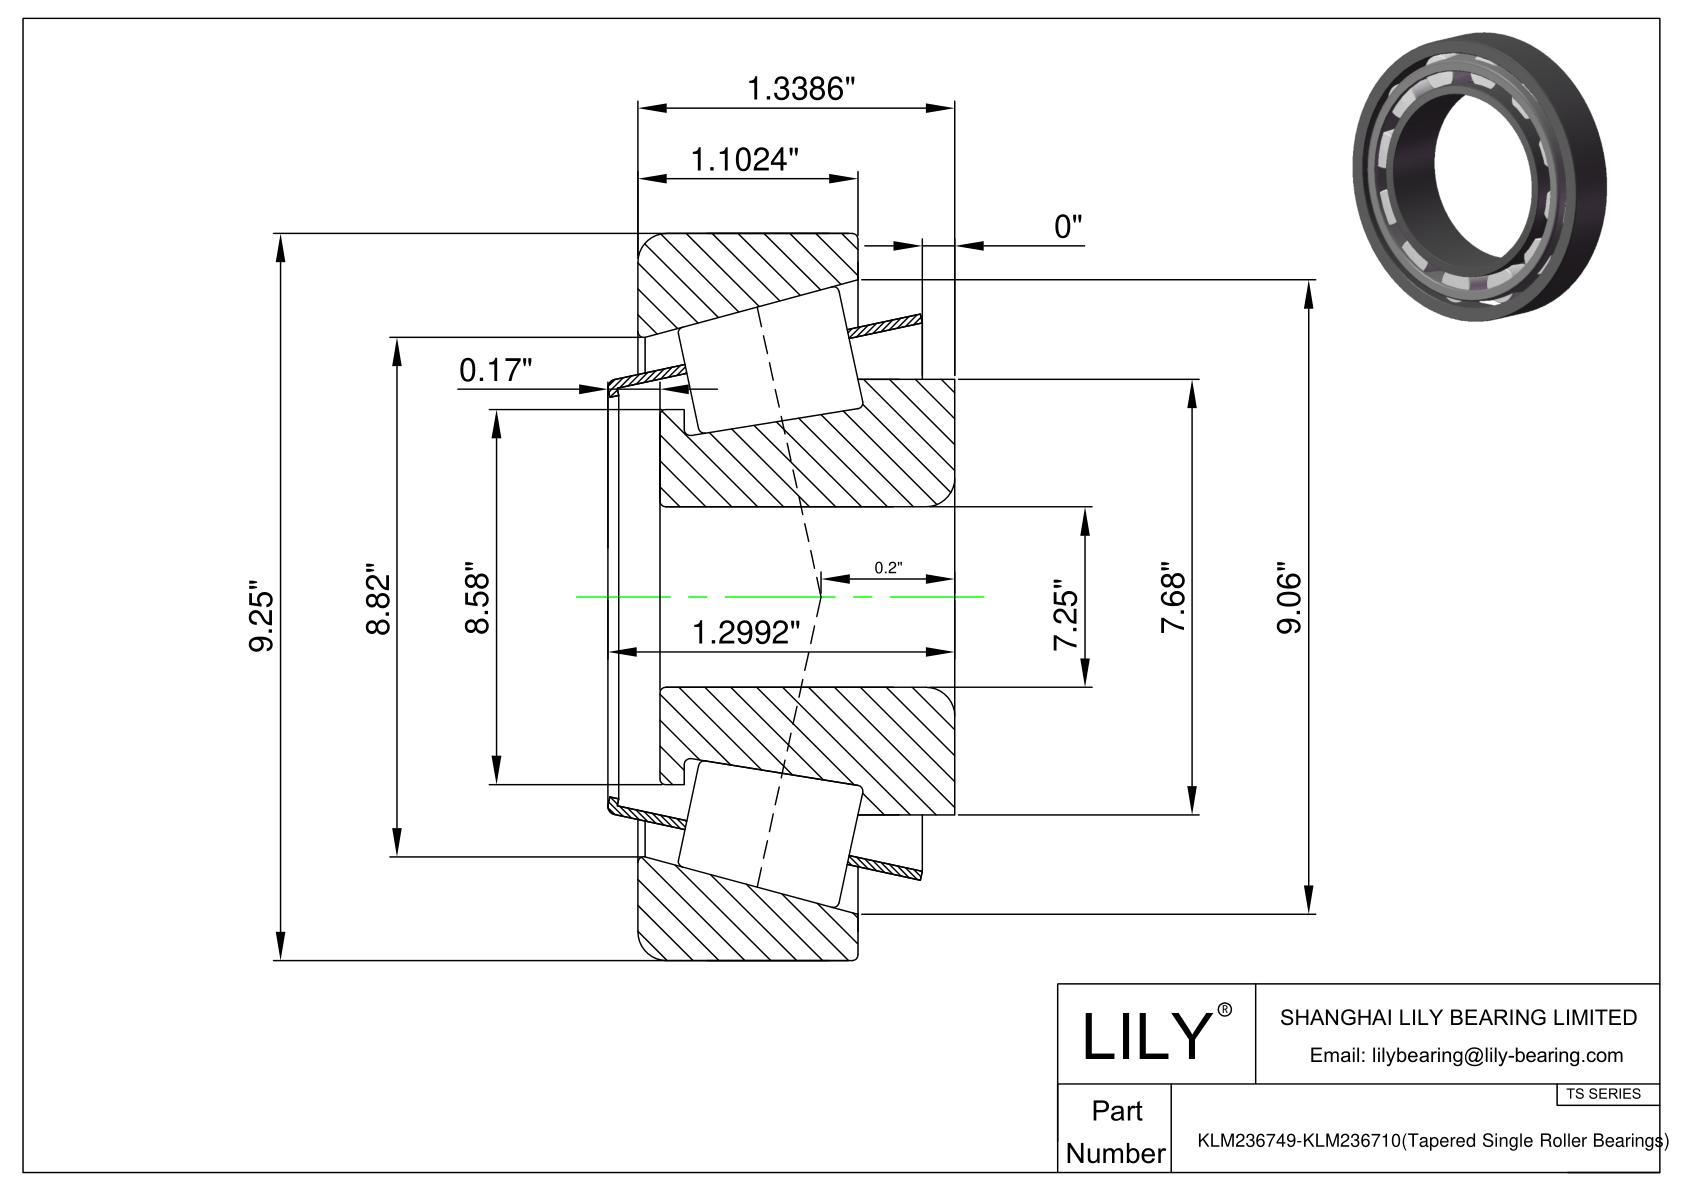 KLM236749-KLM236710 TS (Tapered Single Roller Bearings) (Imperial) cad drawing